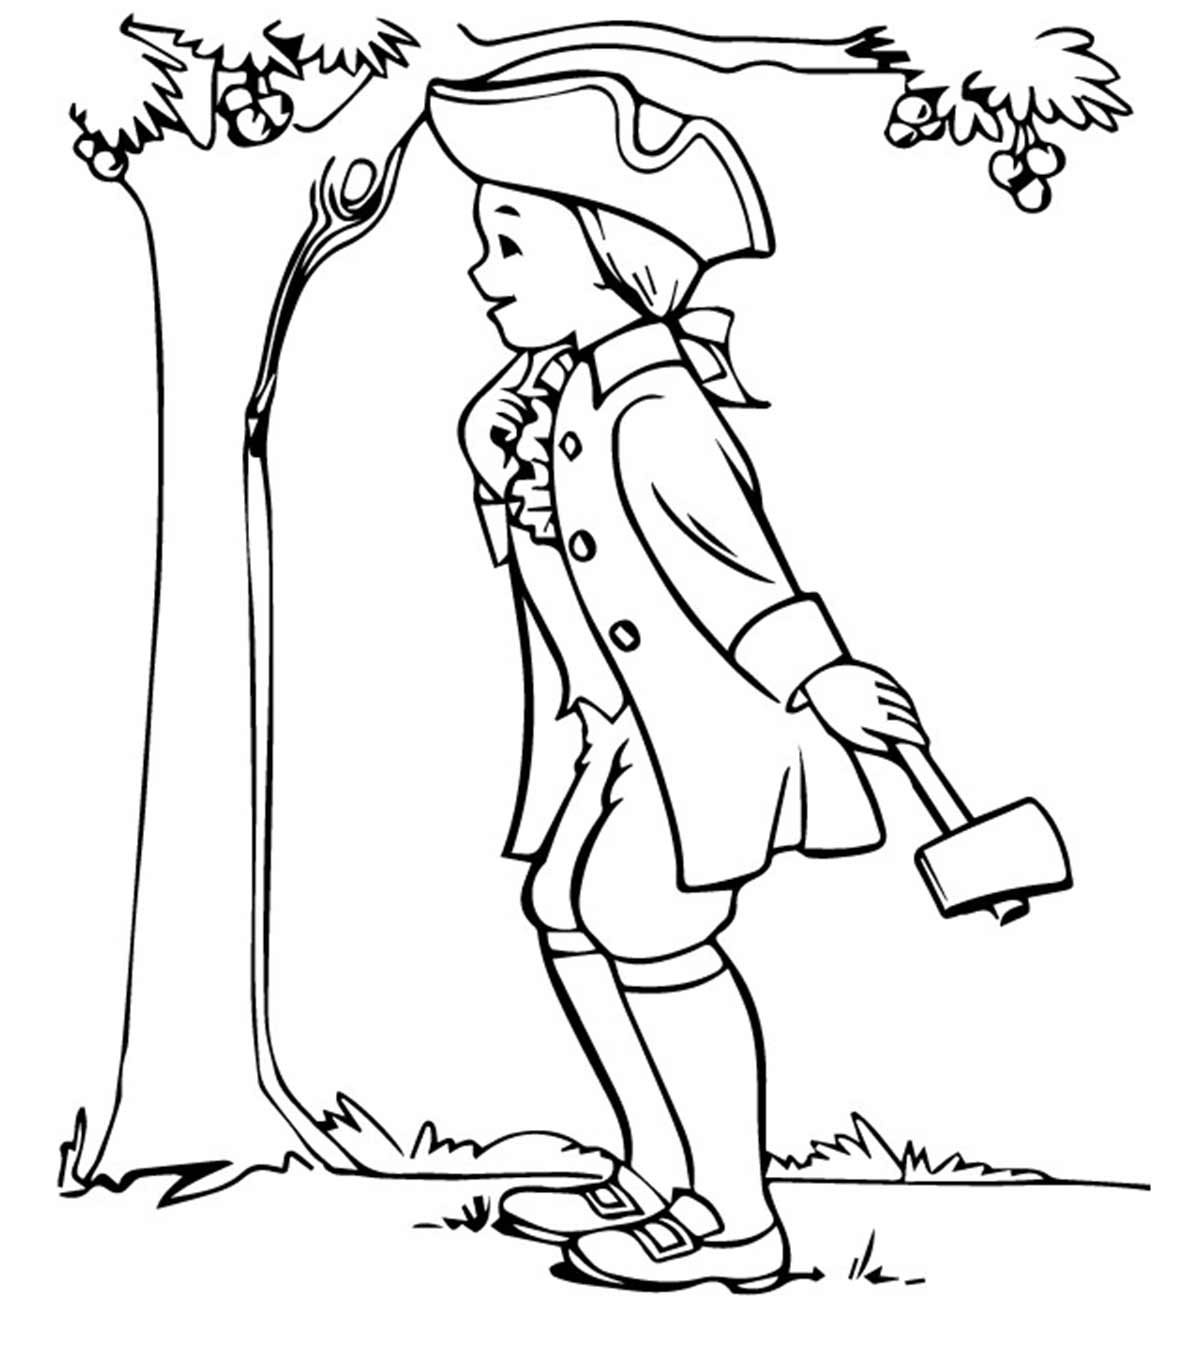 10 Best George Washington Coloring Pages For Toddlers_image